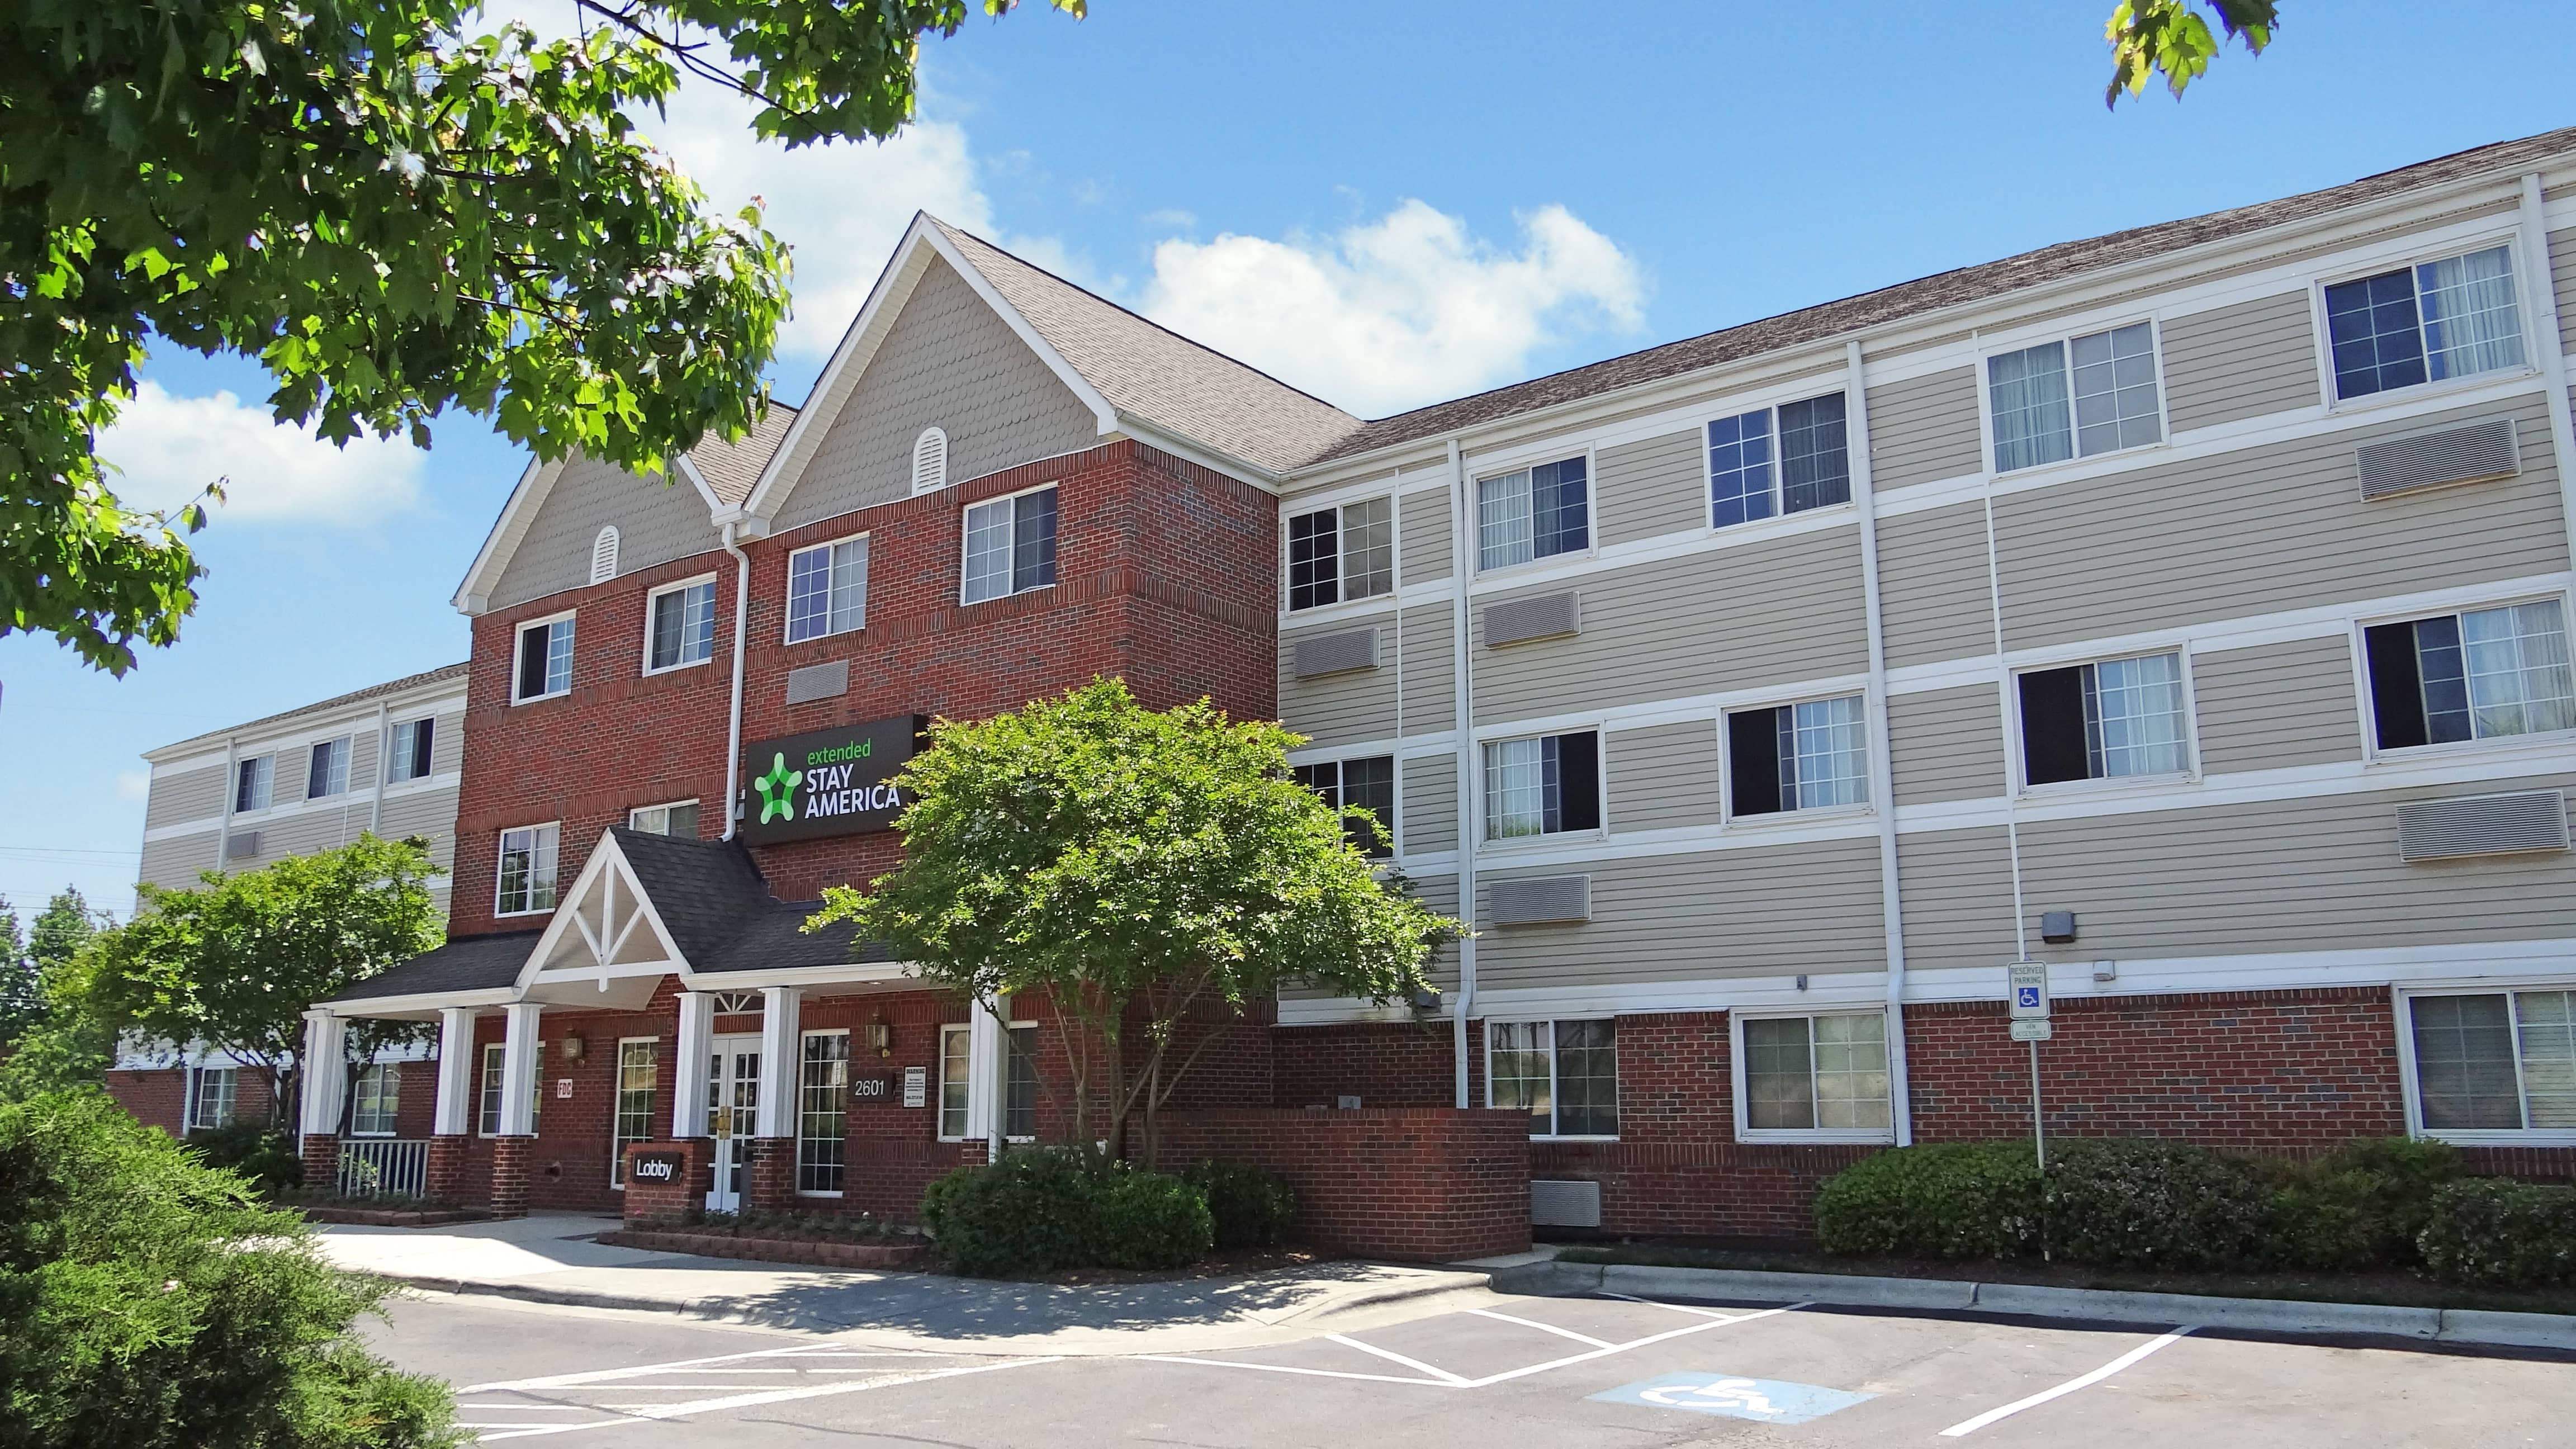 Photo of Extended Stay America - Raleigh - Northeast, Raleigh, NC